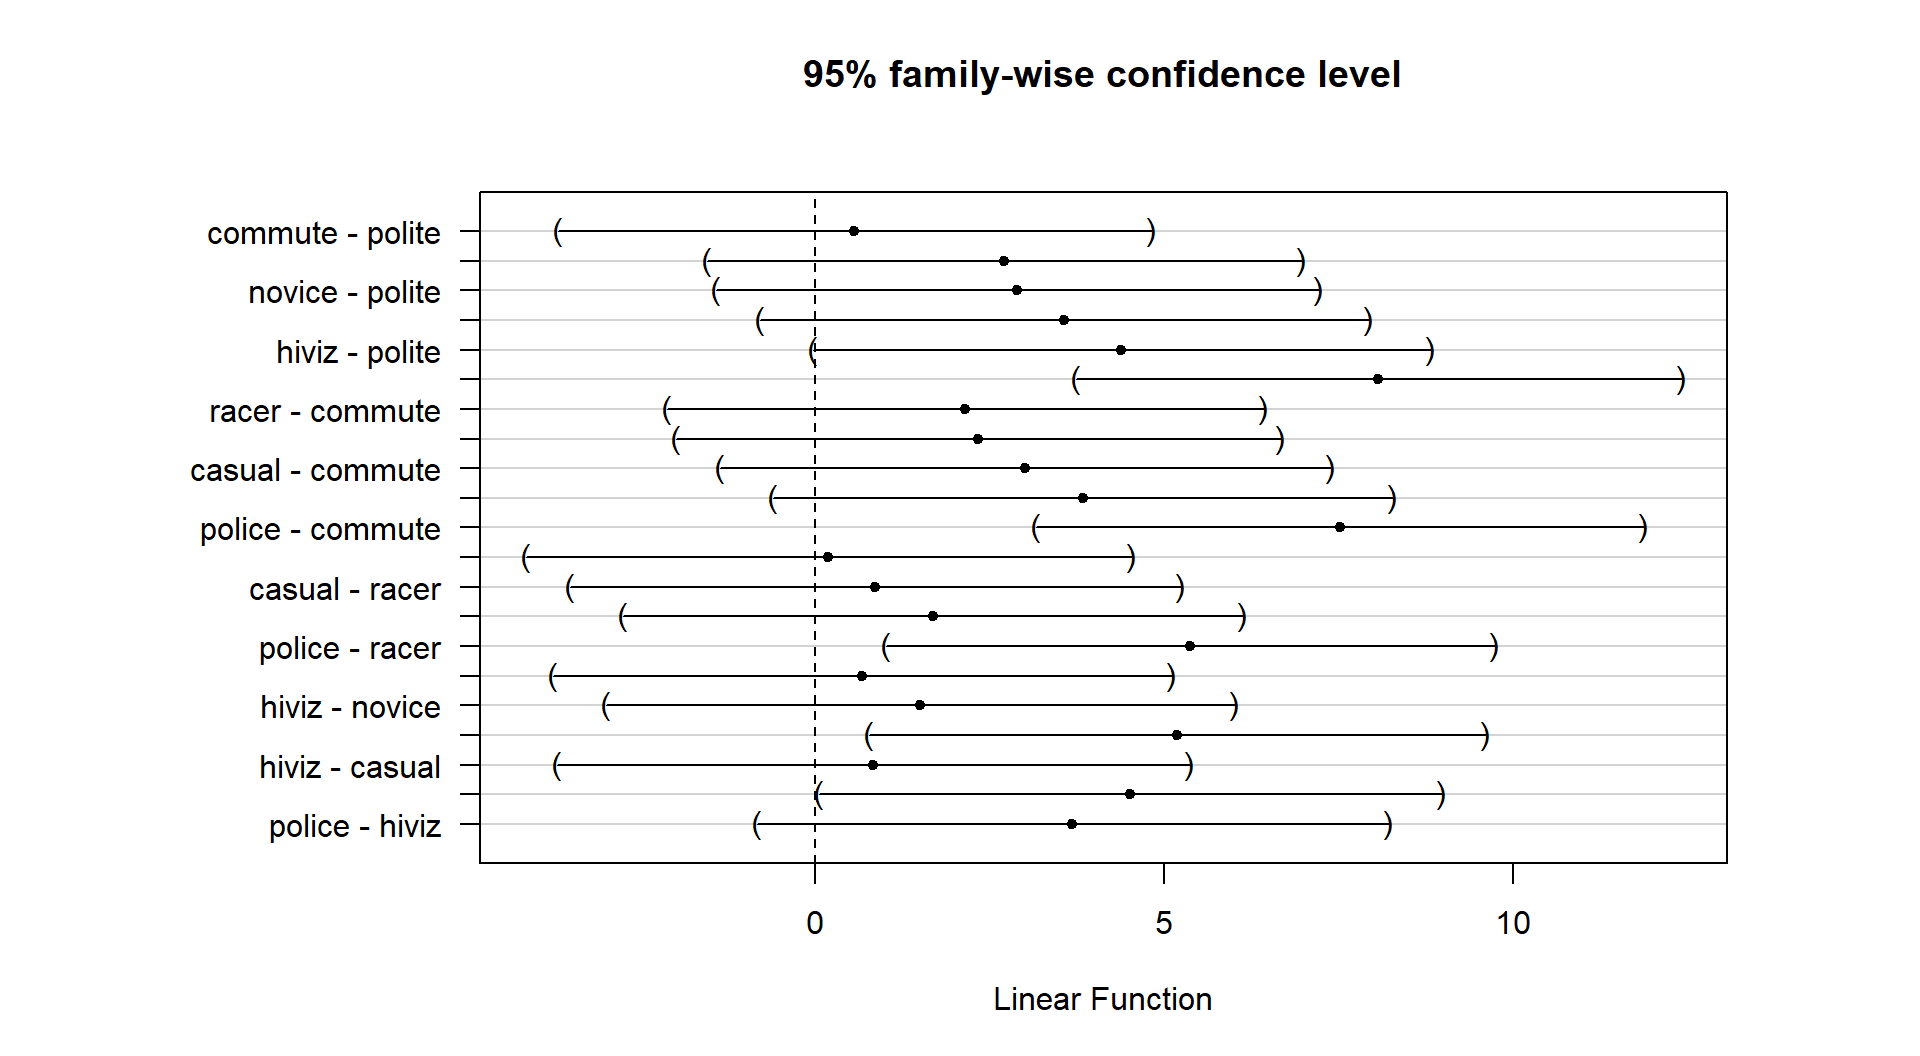 Tukey’s HSD confidence interval results at the 95% family-wise confidence level for the overtake distances linear model using the new Condition2 explanatory variable.